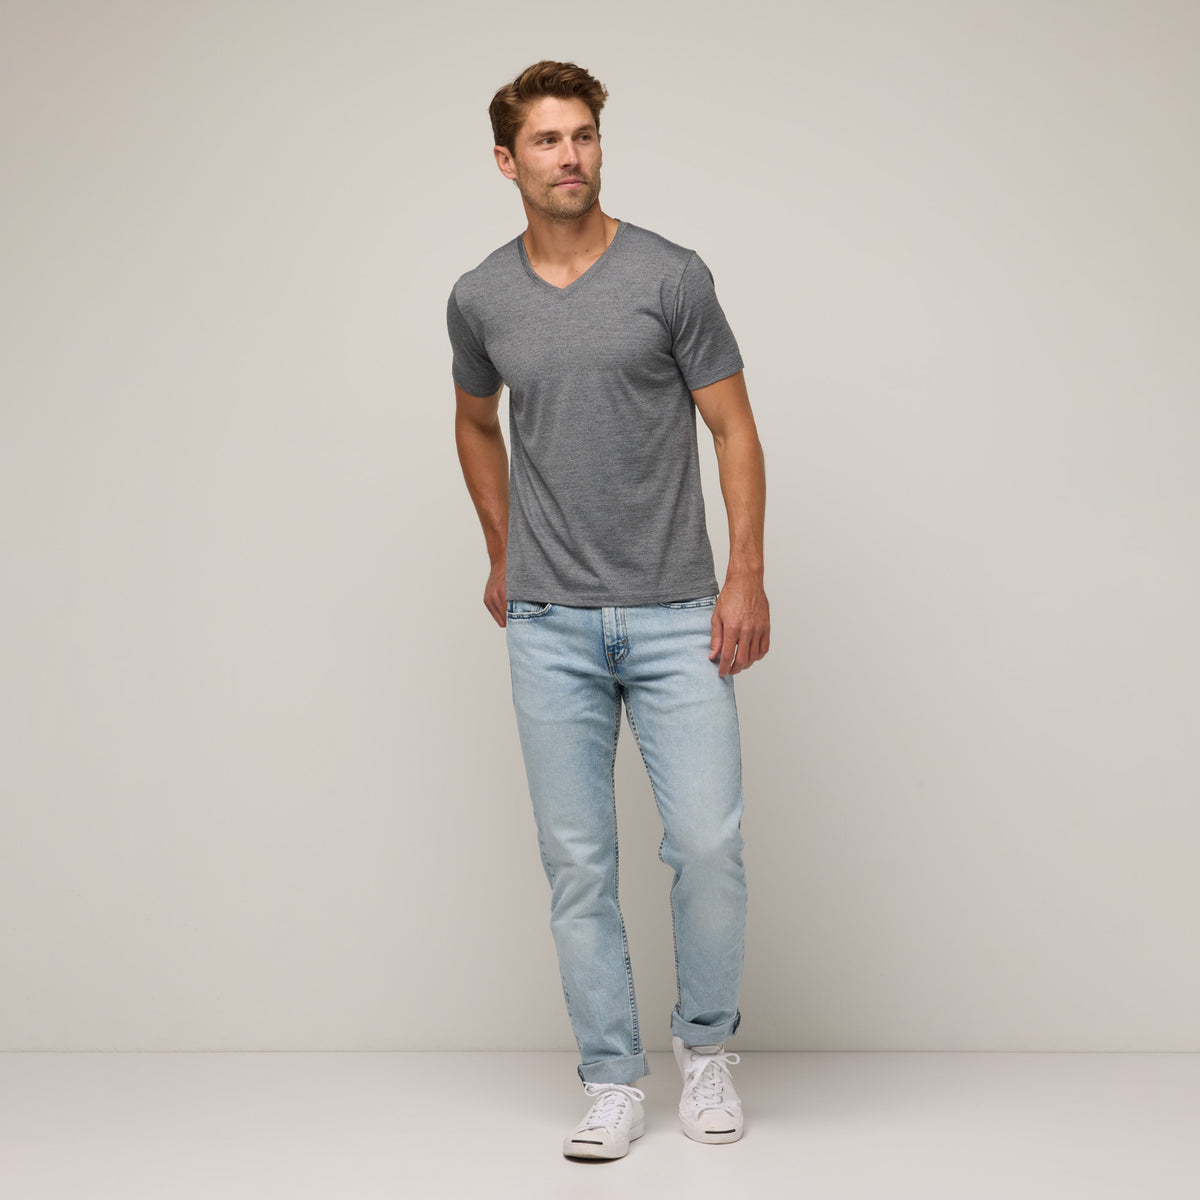 image-on-hover,model-spec: Matt is 6'2", 176 lbs, and wears size M